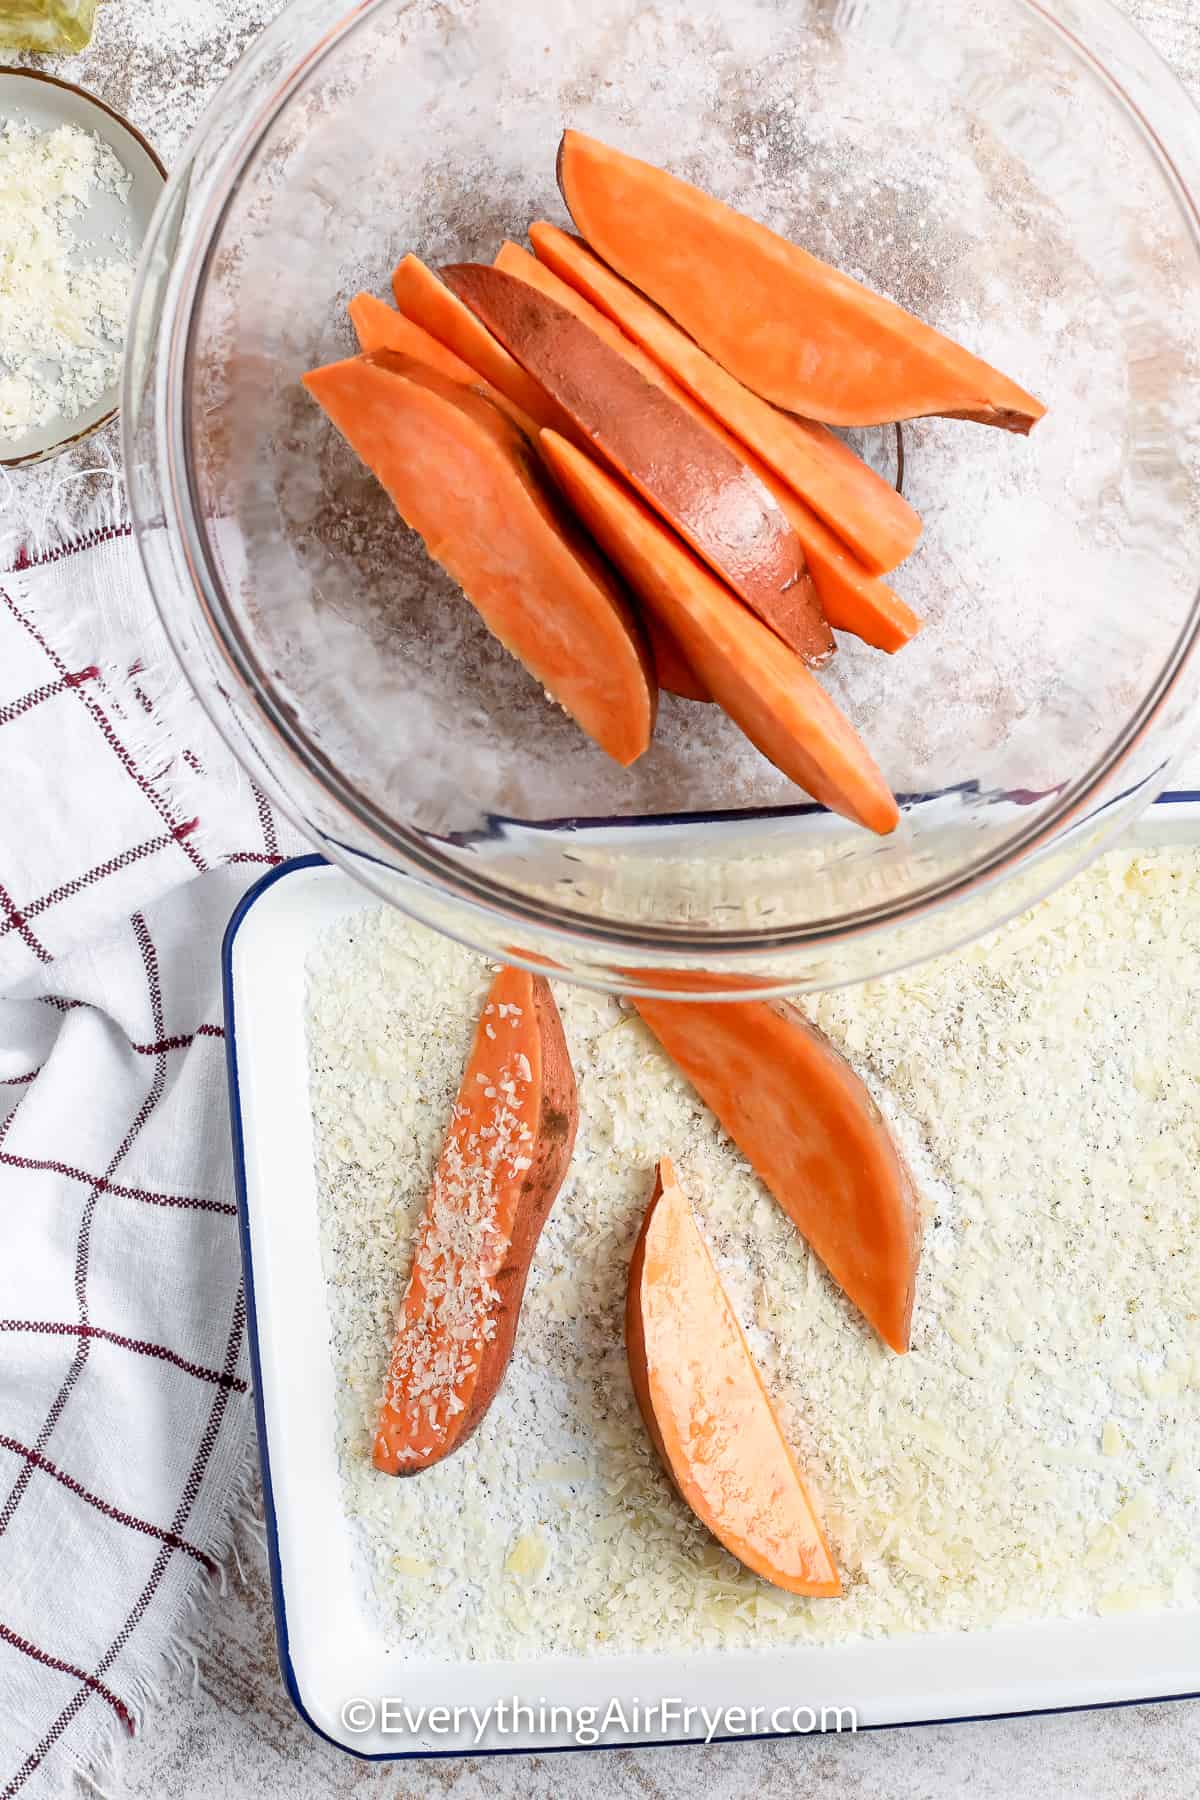 Sweet potato wedges being coated in a parmesan mixture